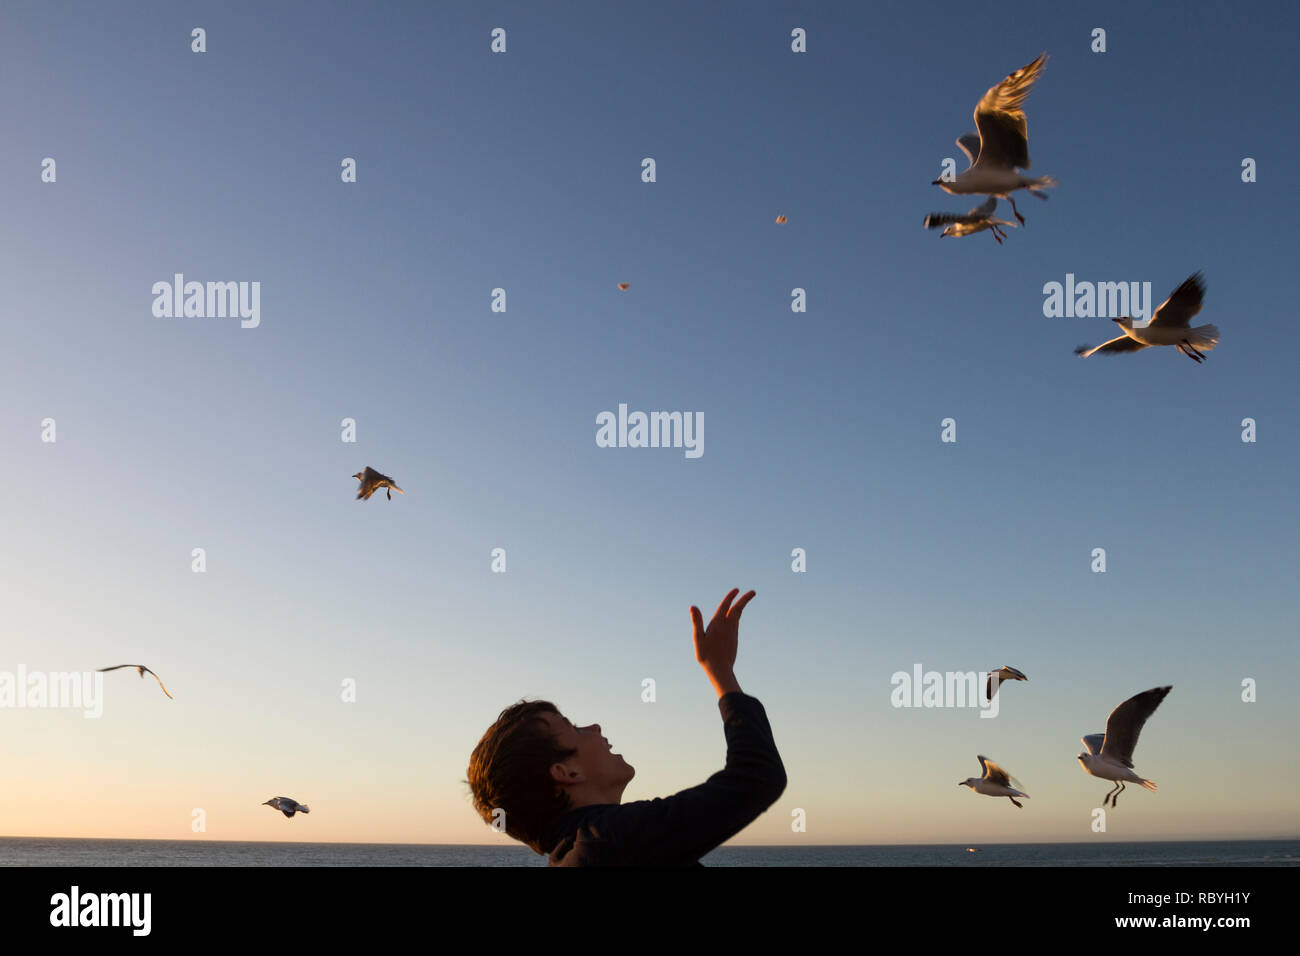 Young boy throws bread crumbs at seagulls flying above Stock Photo